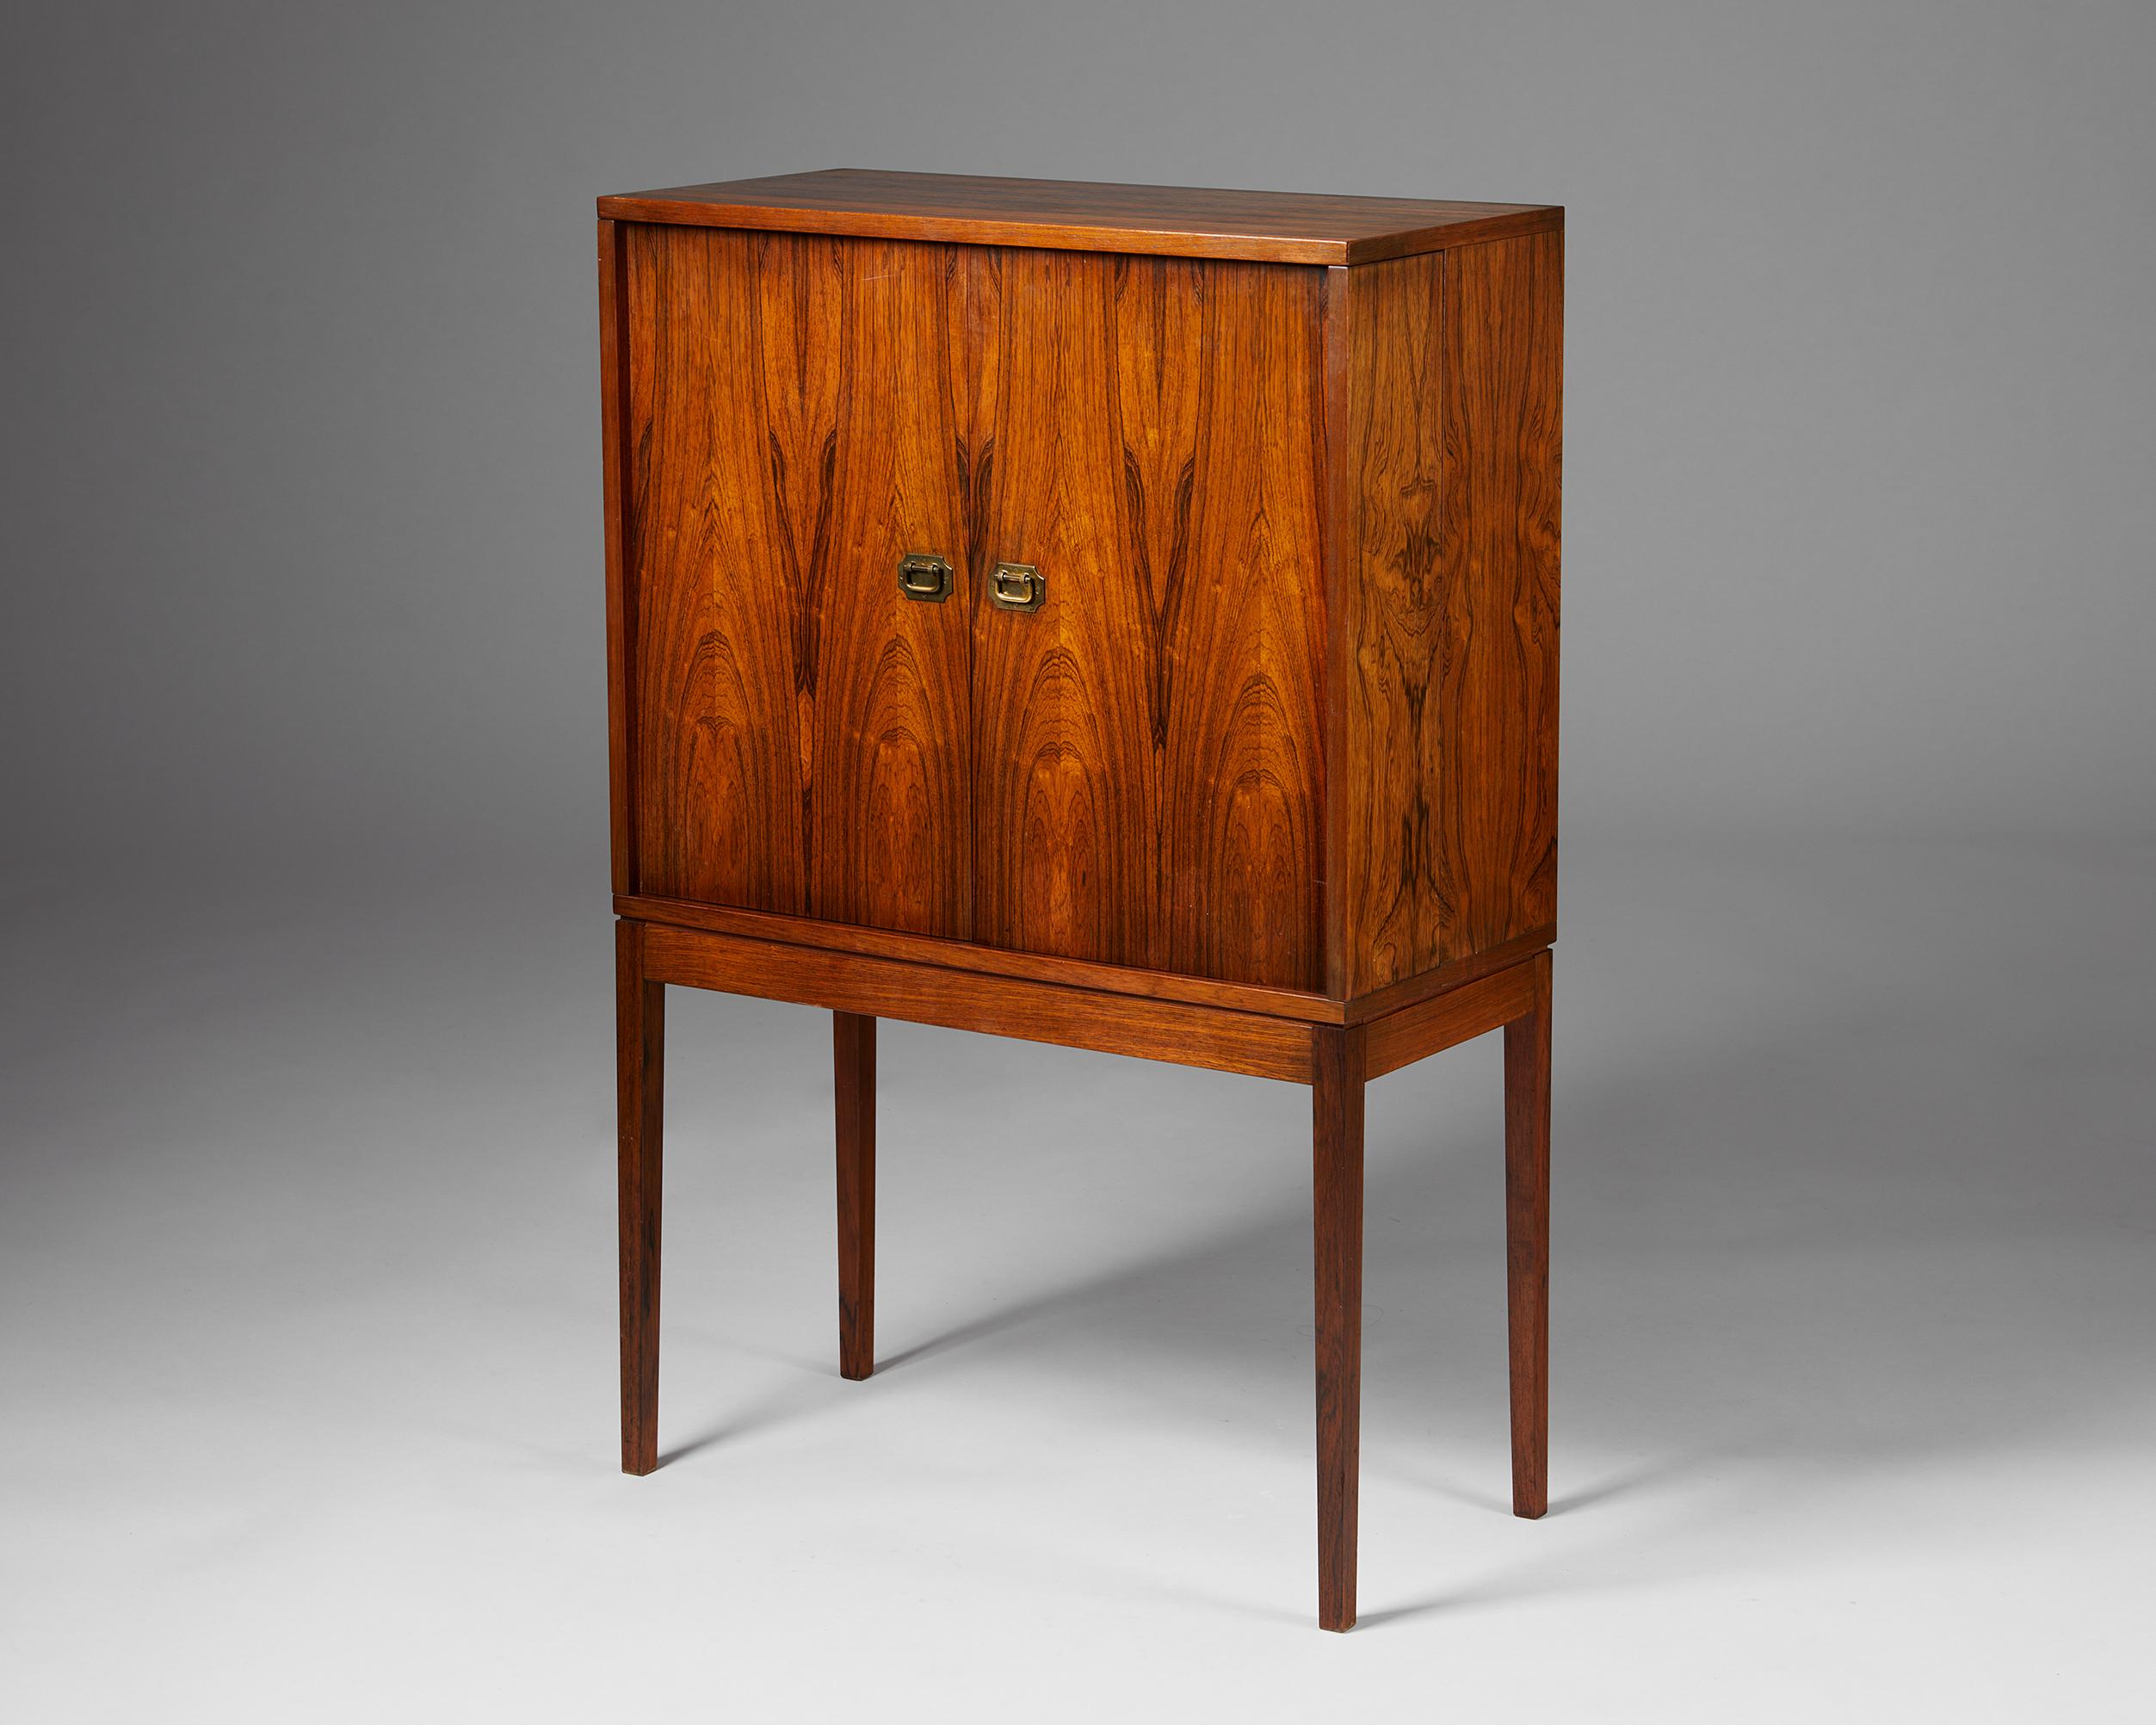 Bar cabinet designed by Henning Korch for CF Christensen Silkeborg,
Denmark, 1960s.
Rosewood and brass.

Henning Korch’s design aesthetic is characterised by the effective use of rosewood veneer and small colonial style brass handles. This compact